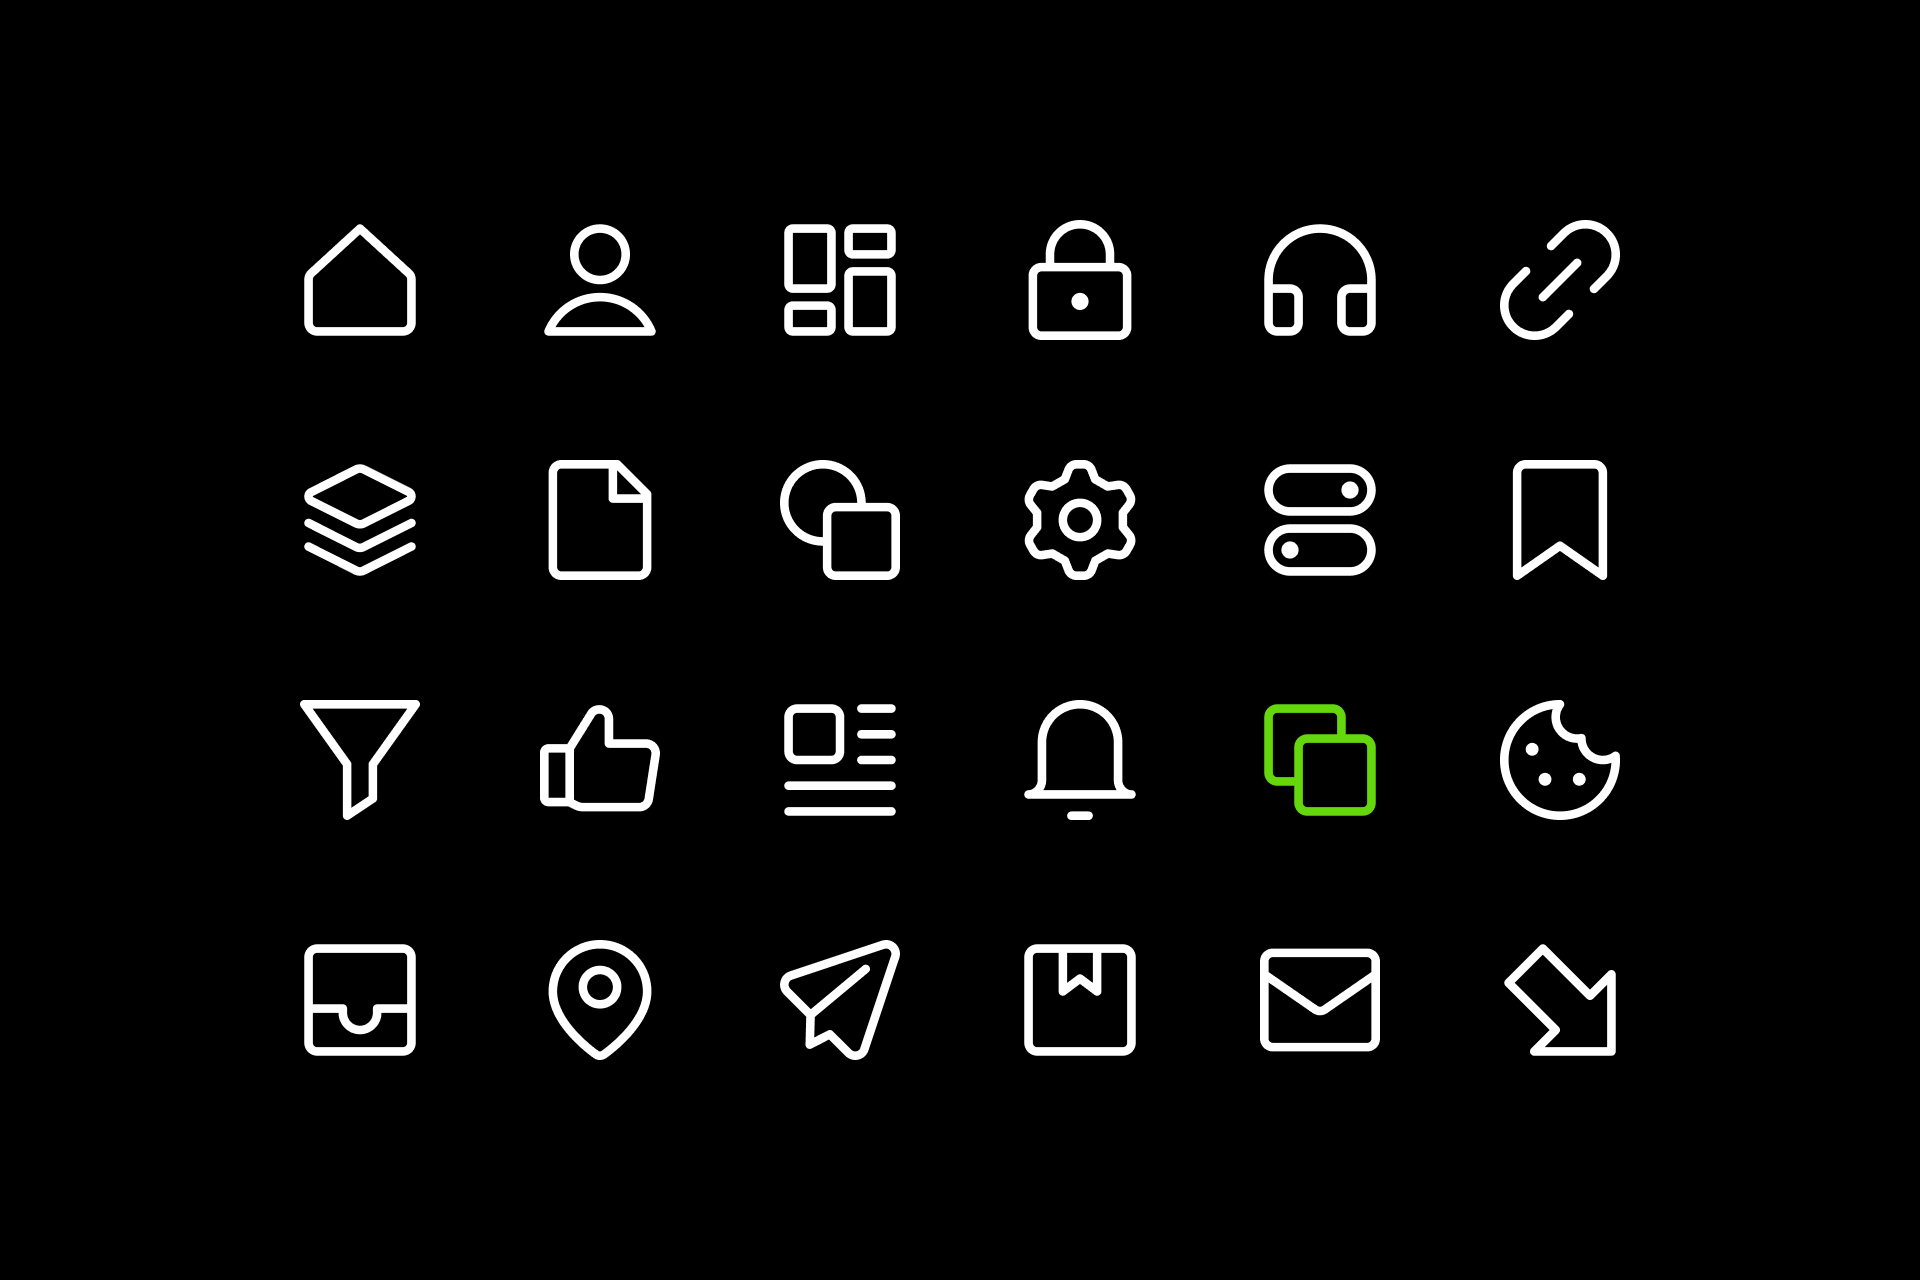 Strategies for creating an icon set